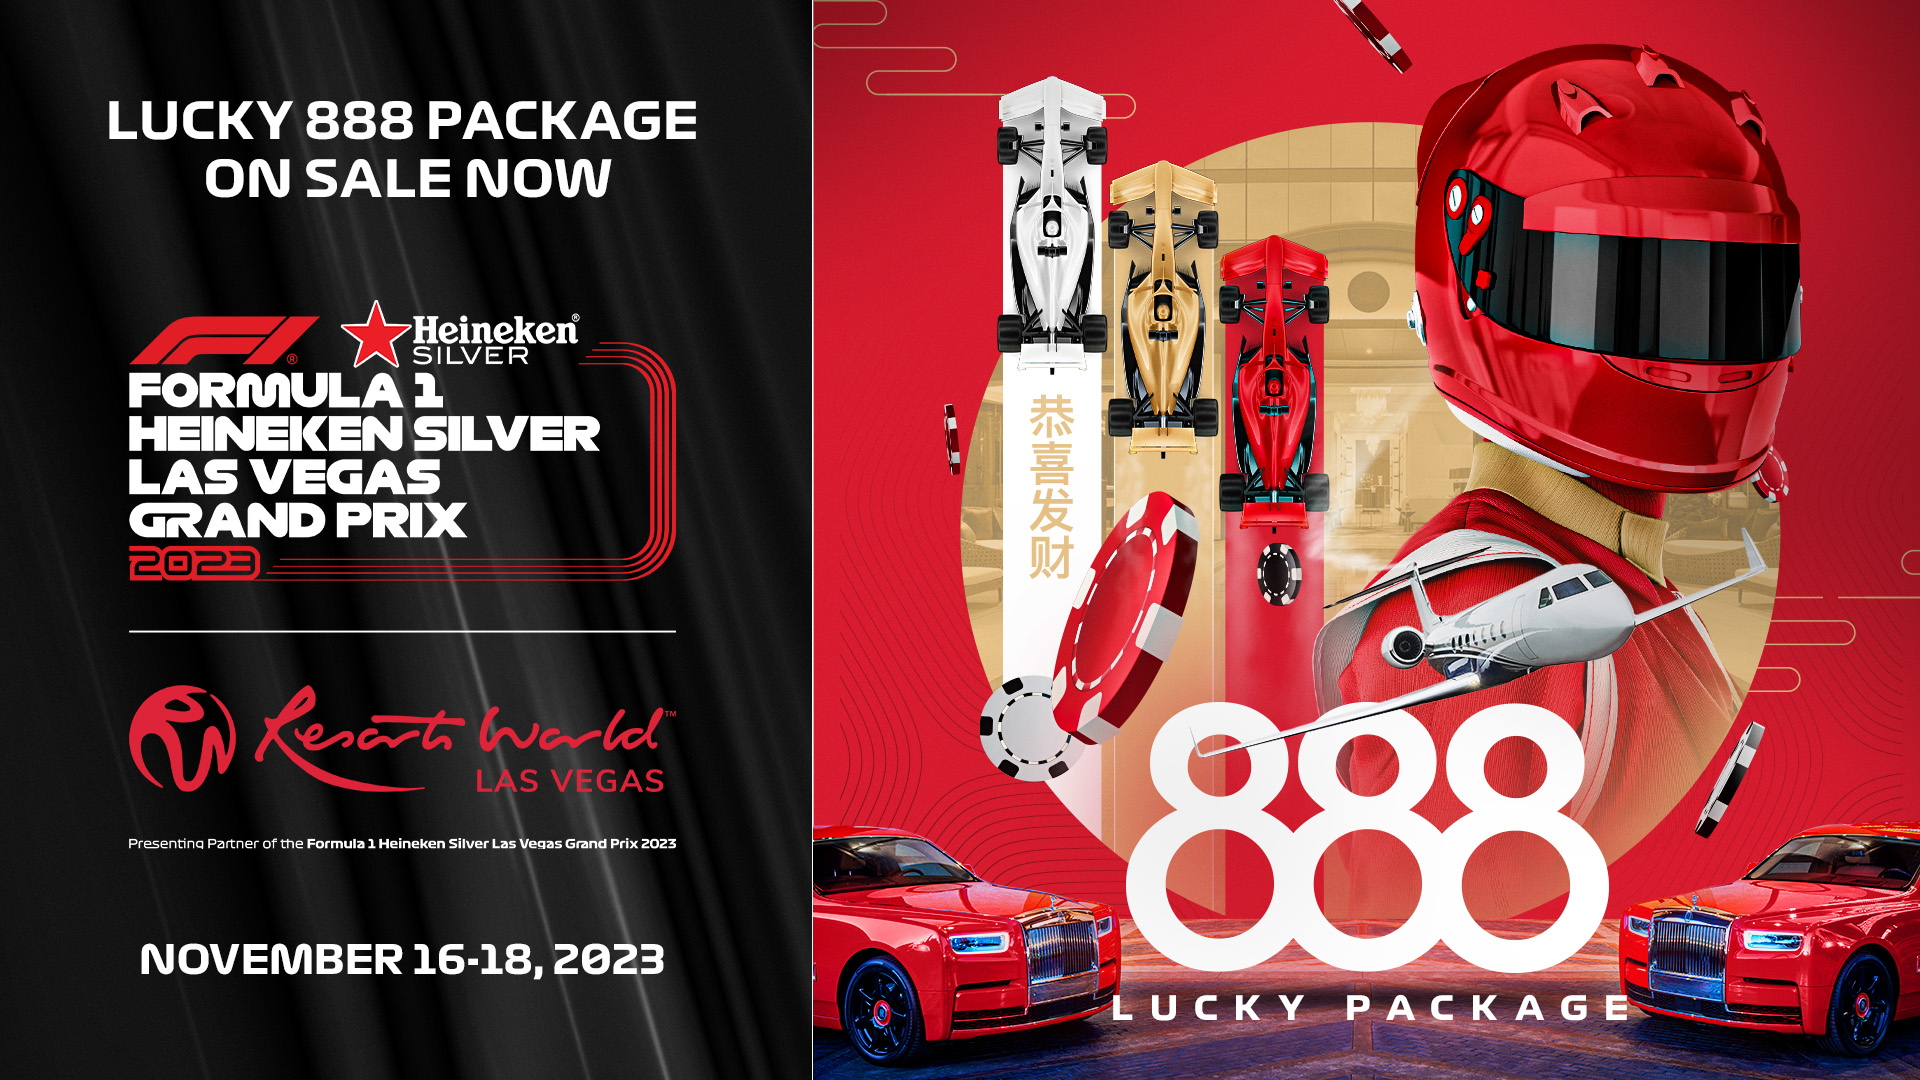 RESORTS WORLD LAS VEGAS PRESENTS THE 888 EXPERIENCE DURING FORMULA 1